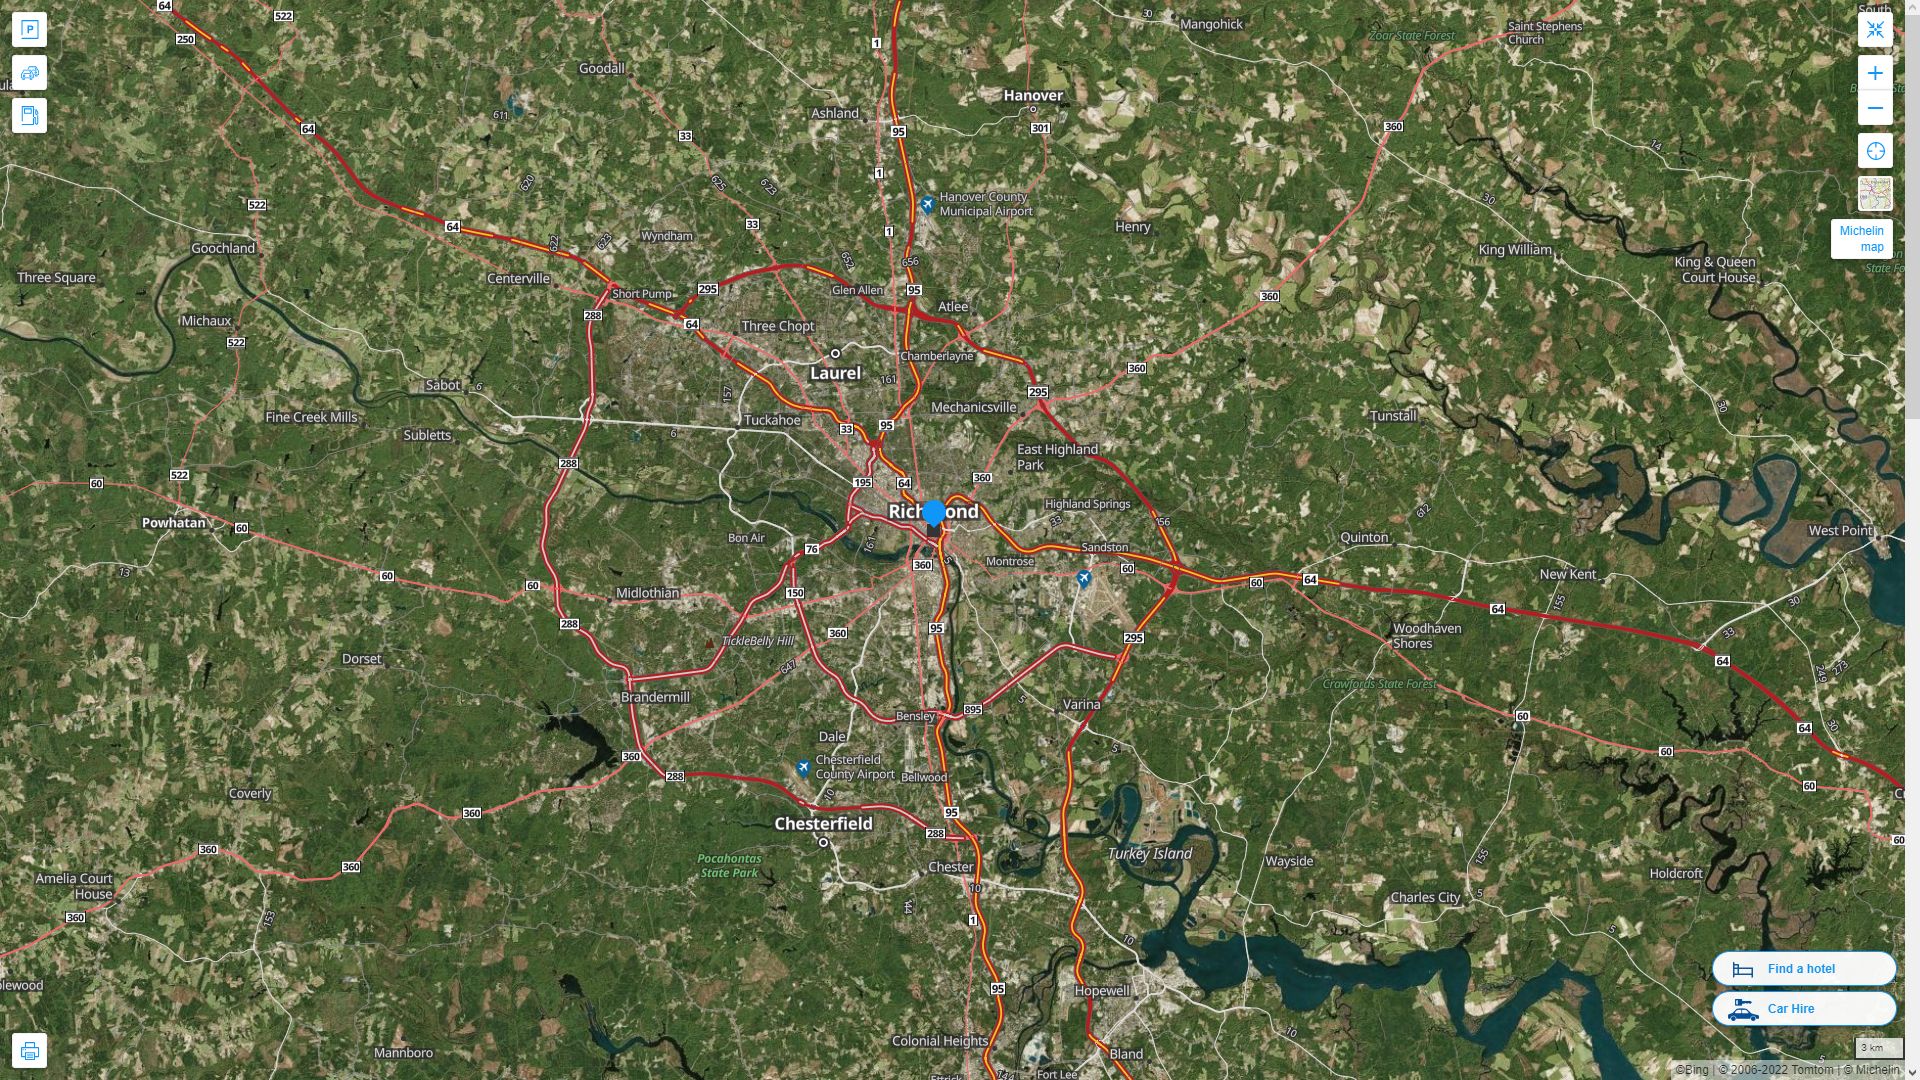 Richmond Virginia Highway and Road Map with Satellite View